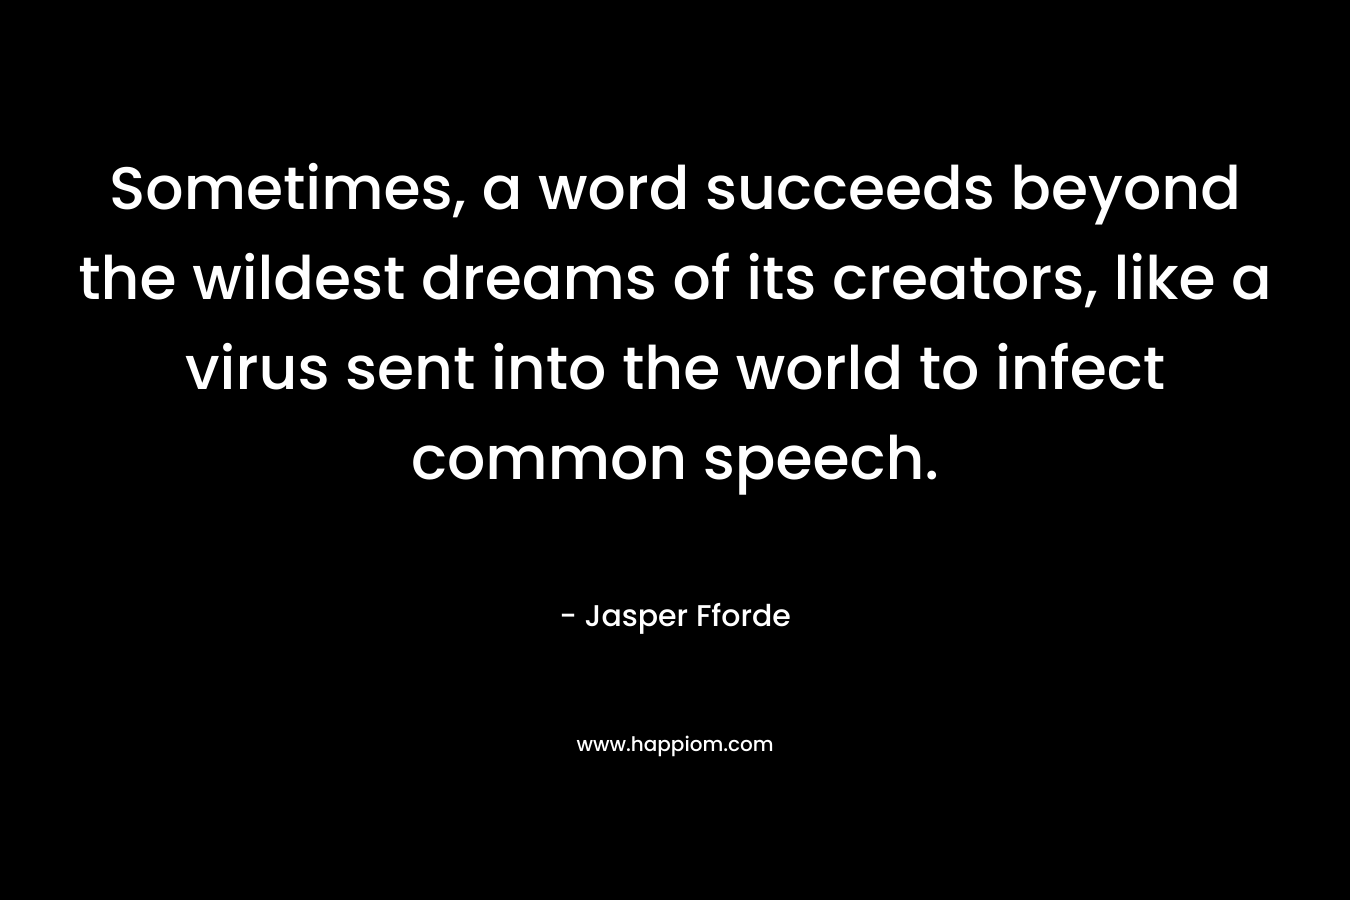 Sometimes, a word succeeds beyond the wildest dreams of its creators, like a virus sent into the world to infect common speech. – Jasper Fforde